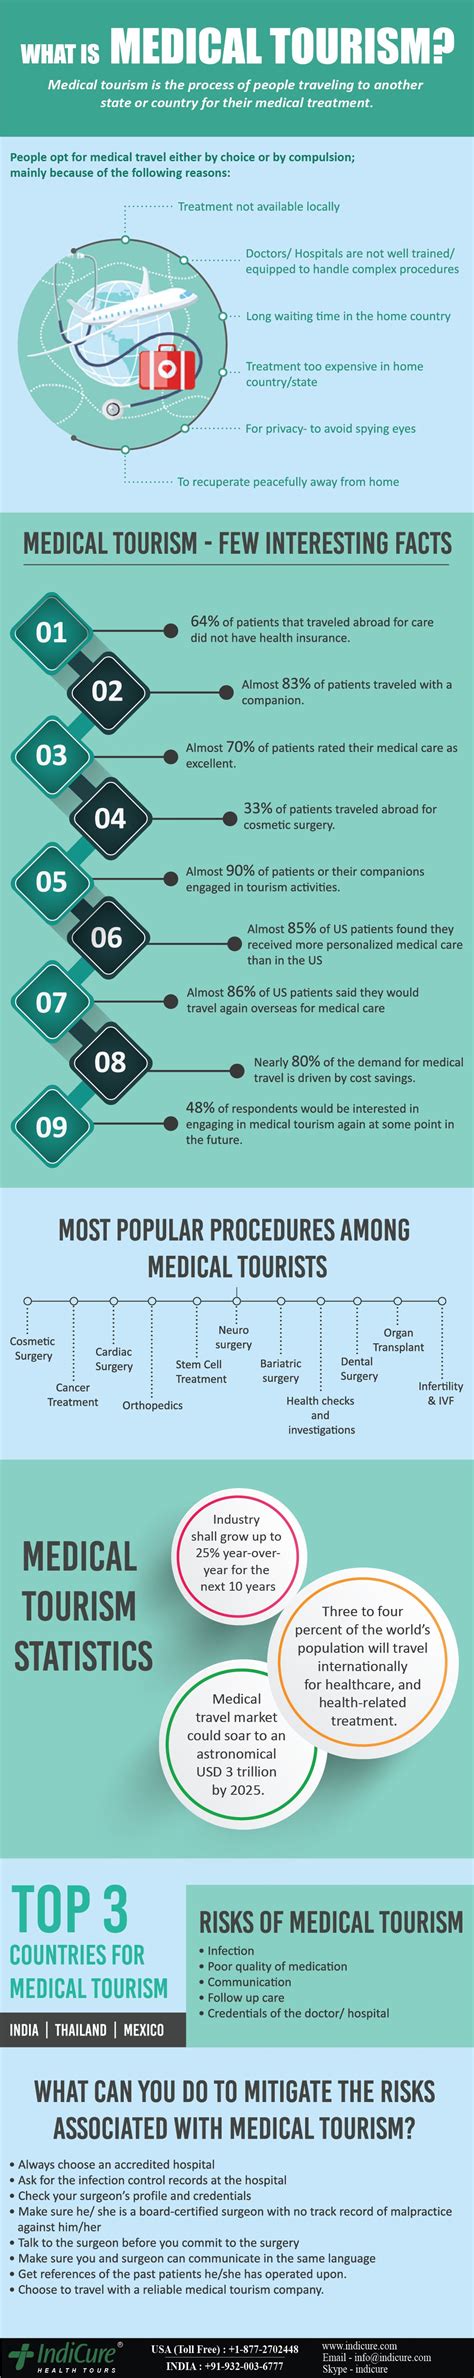 Read To Know What Is Medical Tourism All About Why Medical Tourism